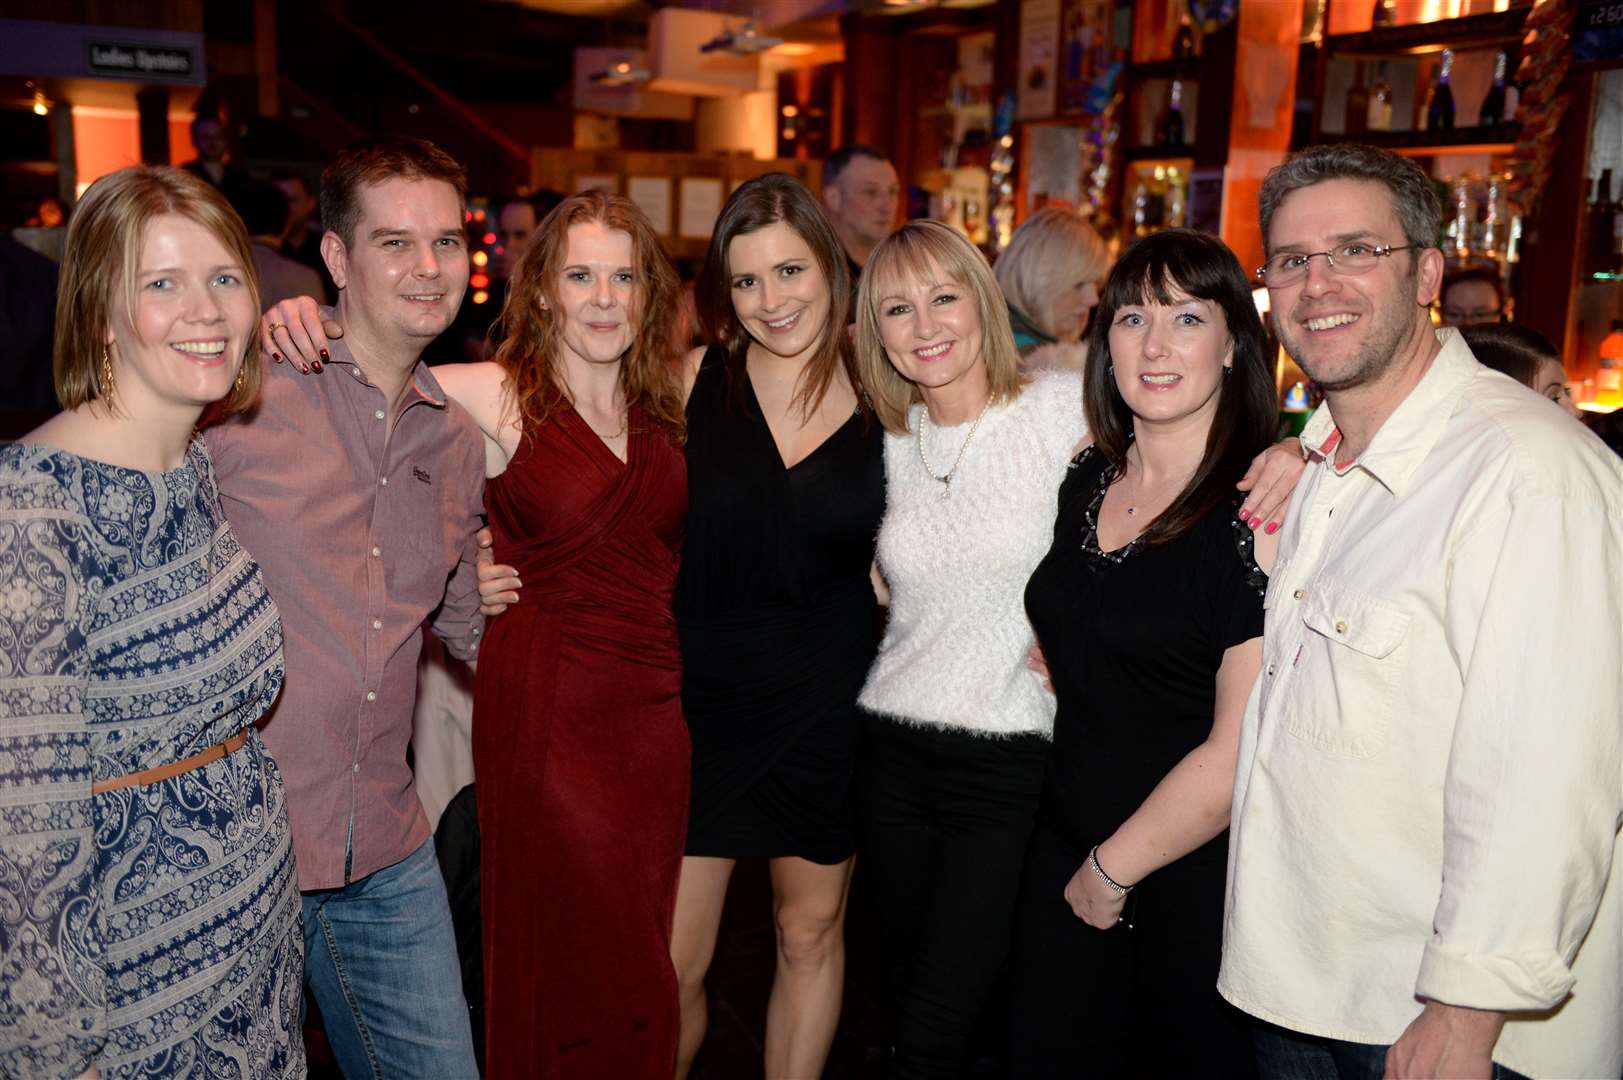 Andrea Dalgetty (red dress) from Tore, parties on her 31st birthday at Auctioneers.Picture: Gary Anthony.